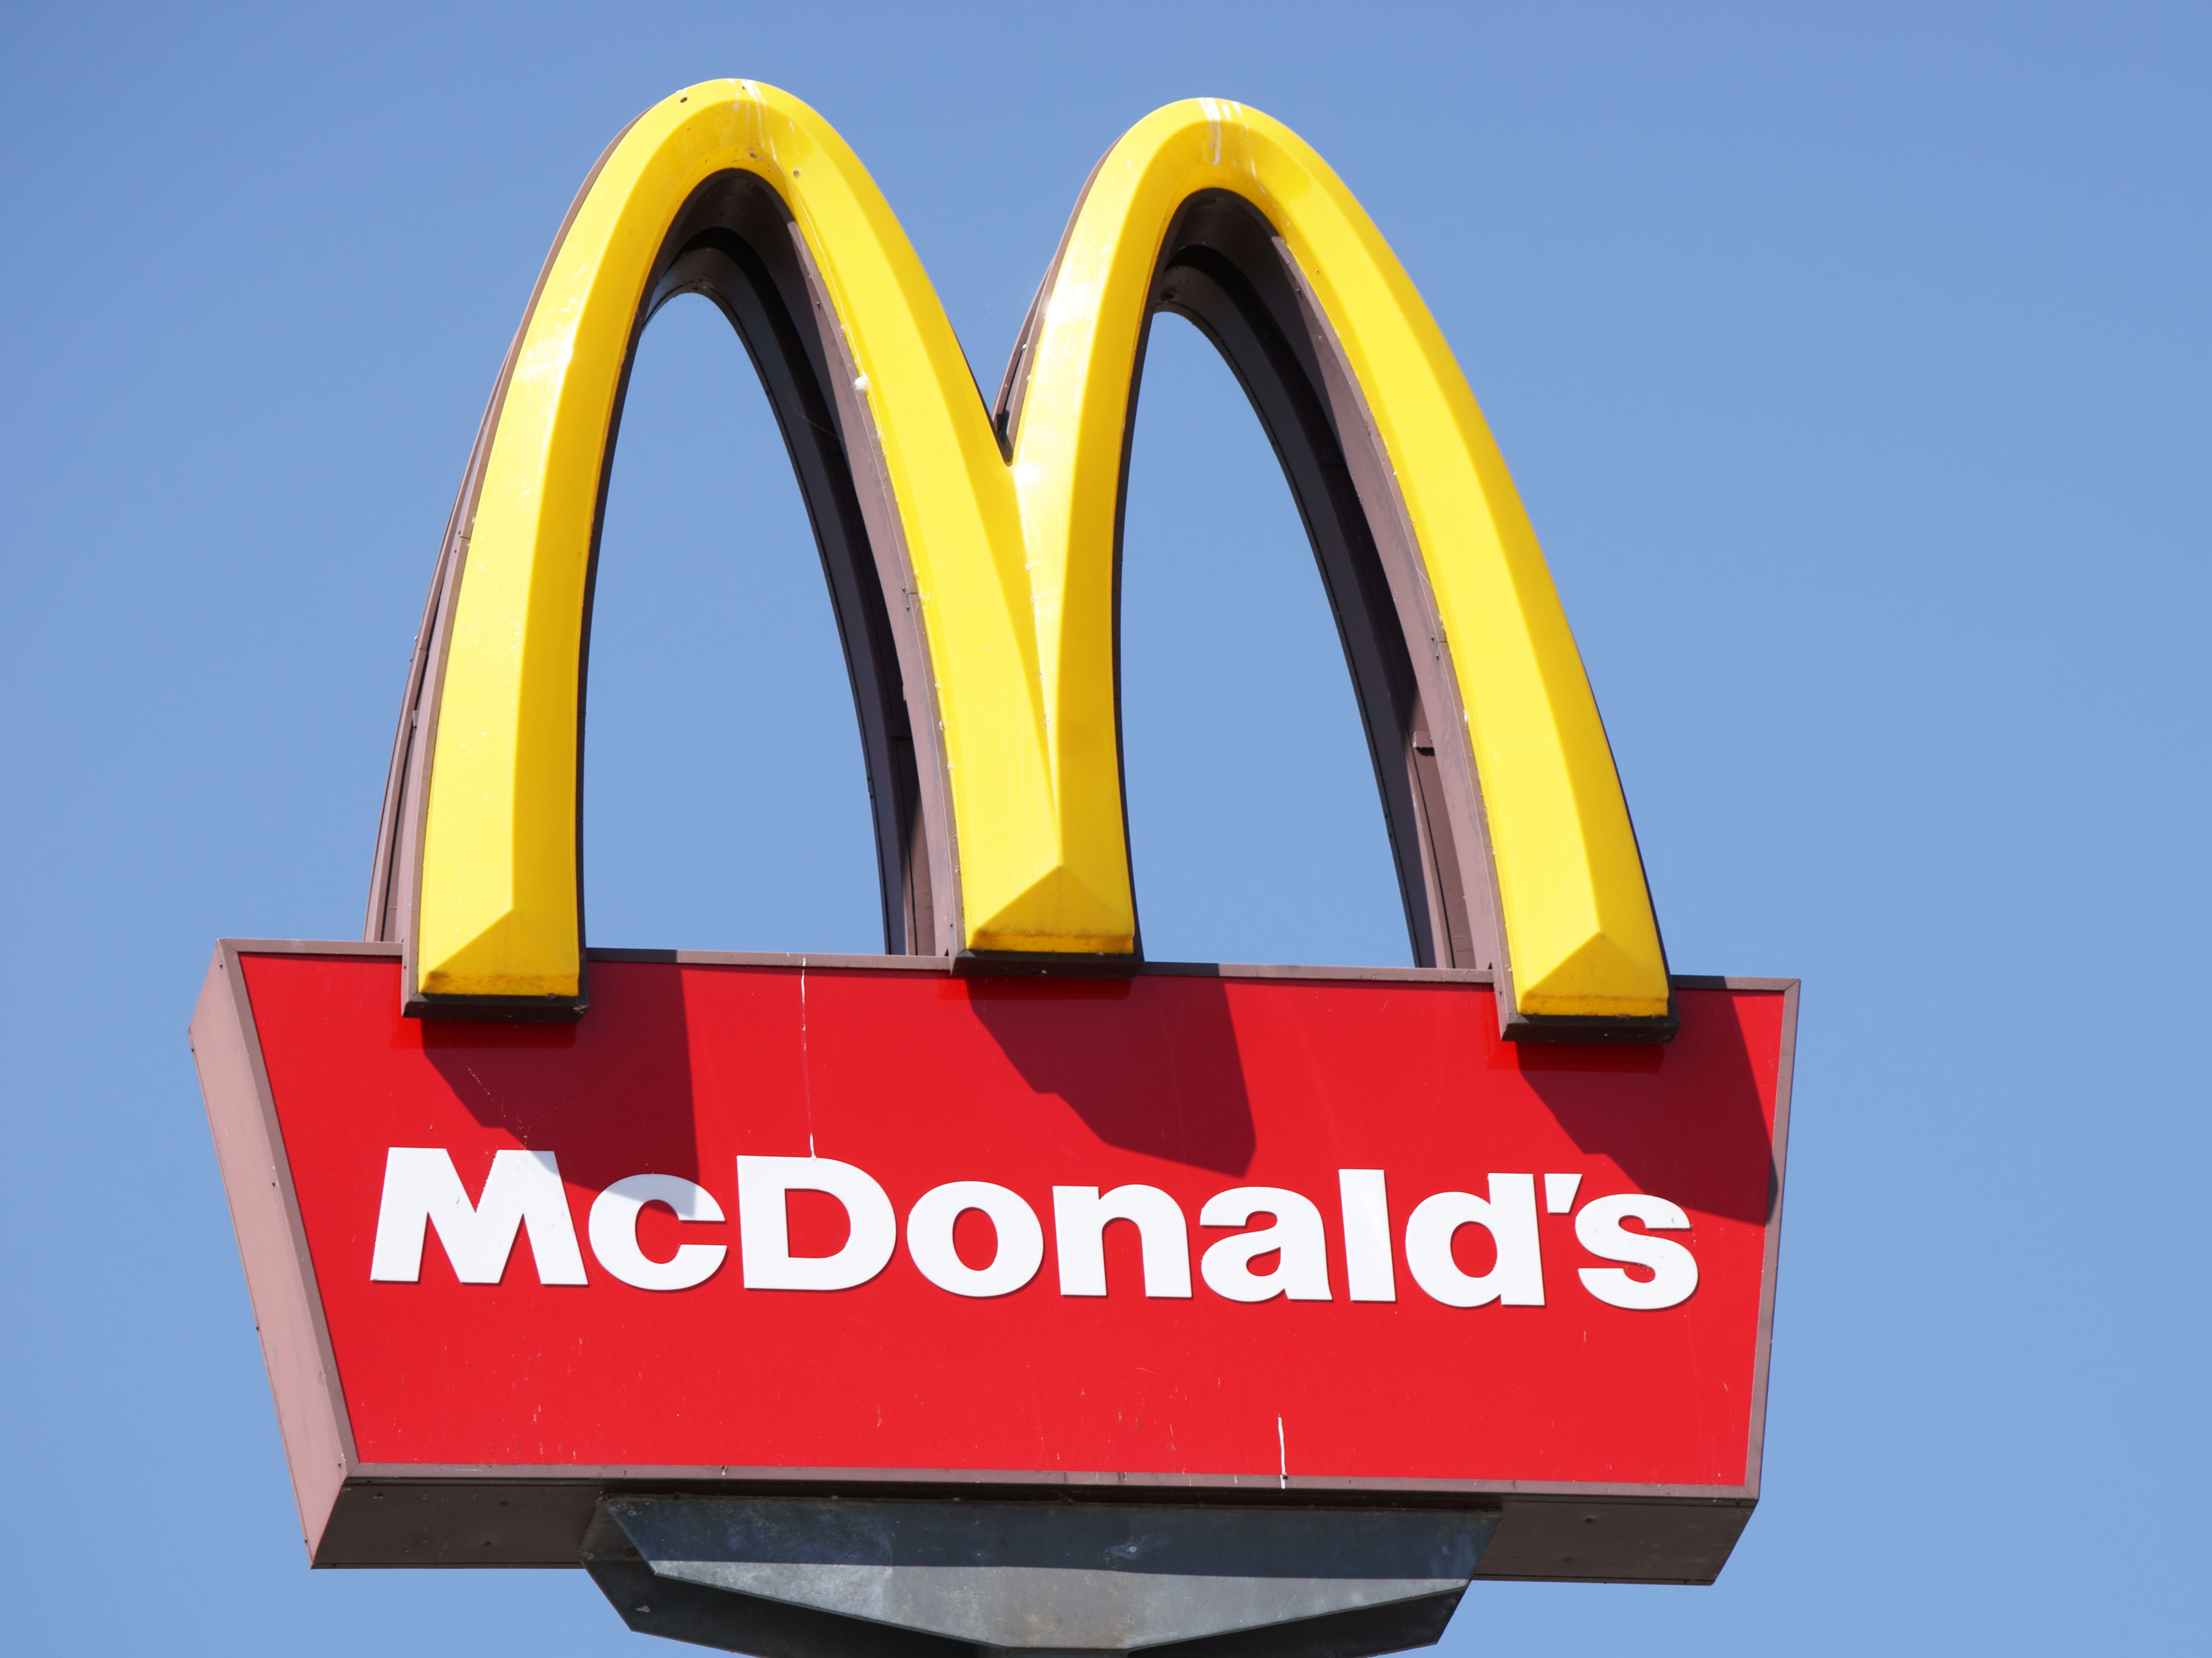 McDonald’s employees are going on strike over allegations of sexual harassment